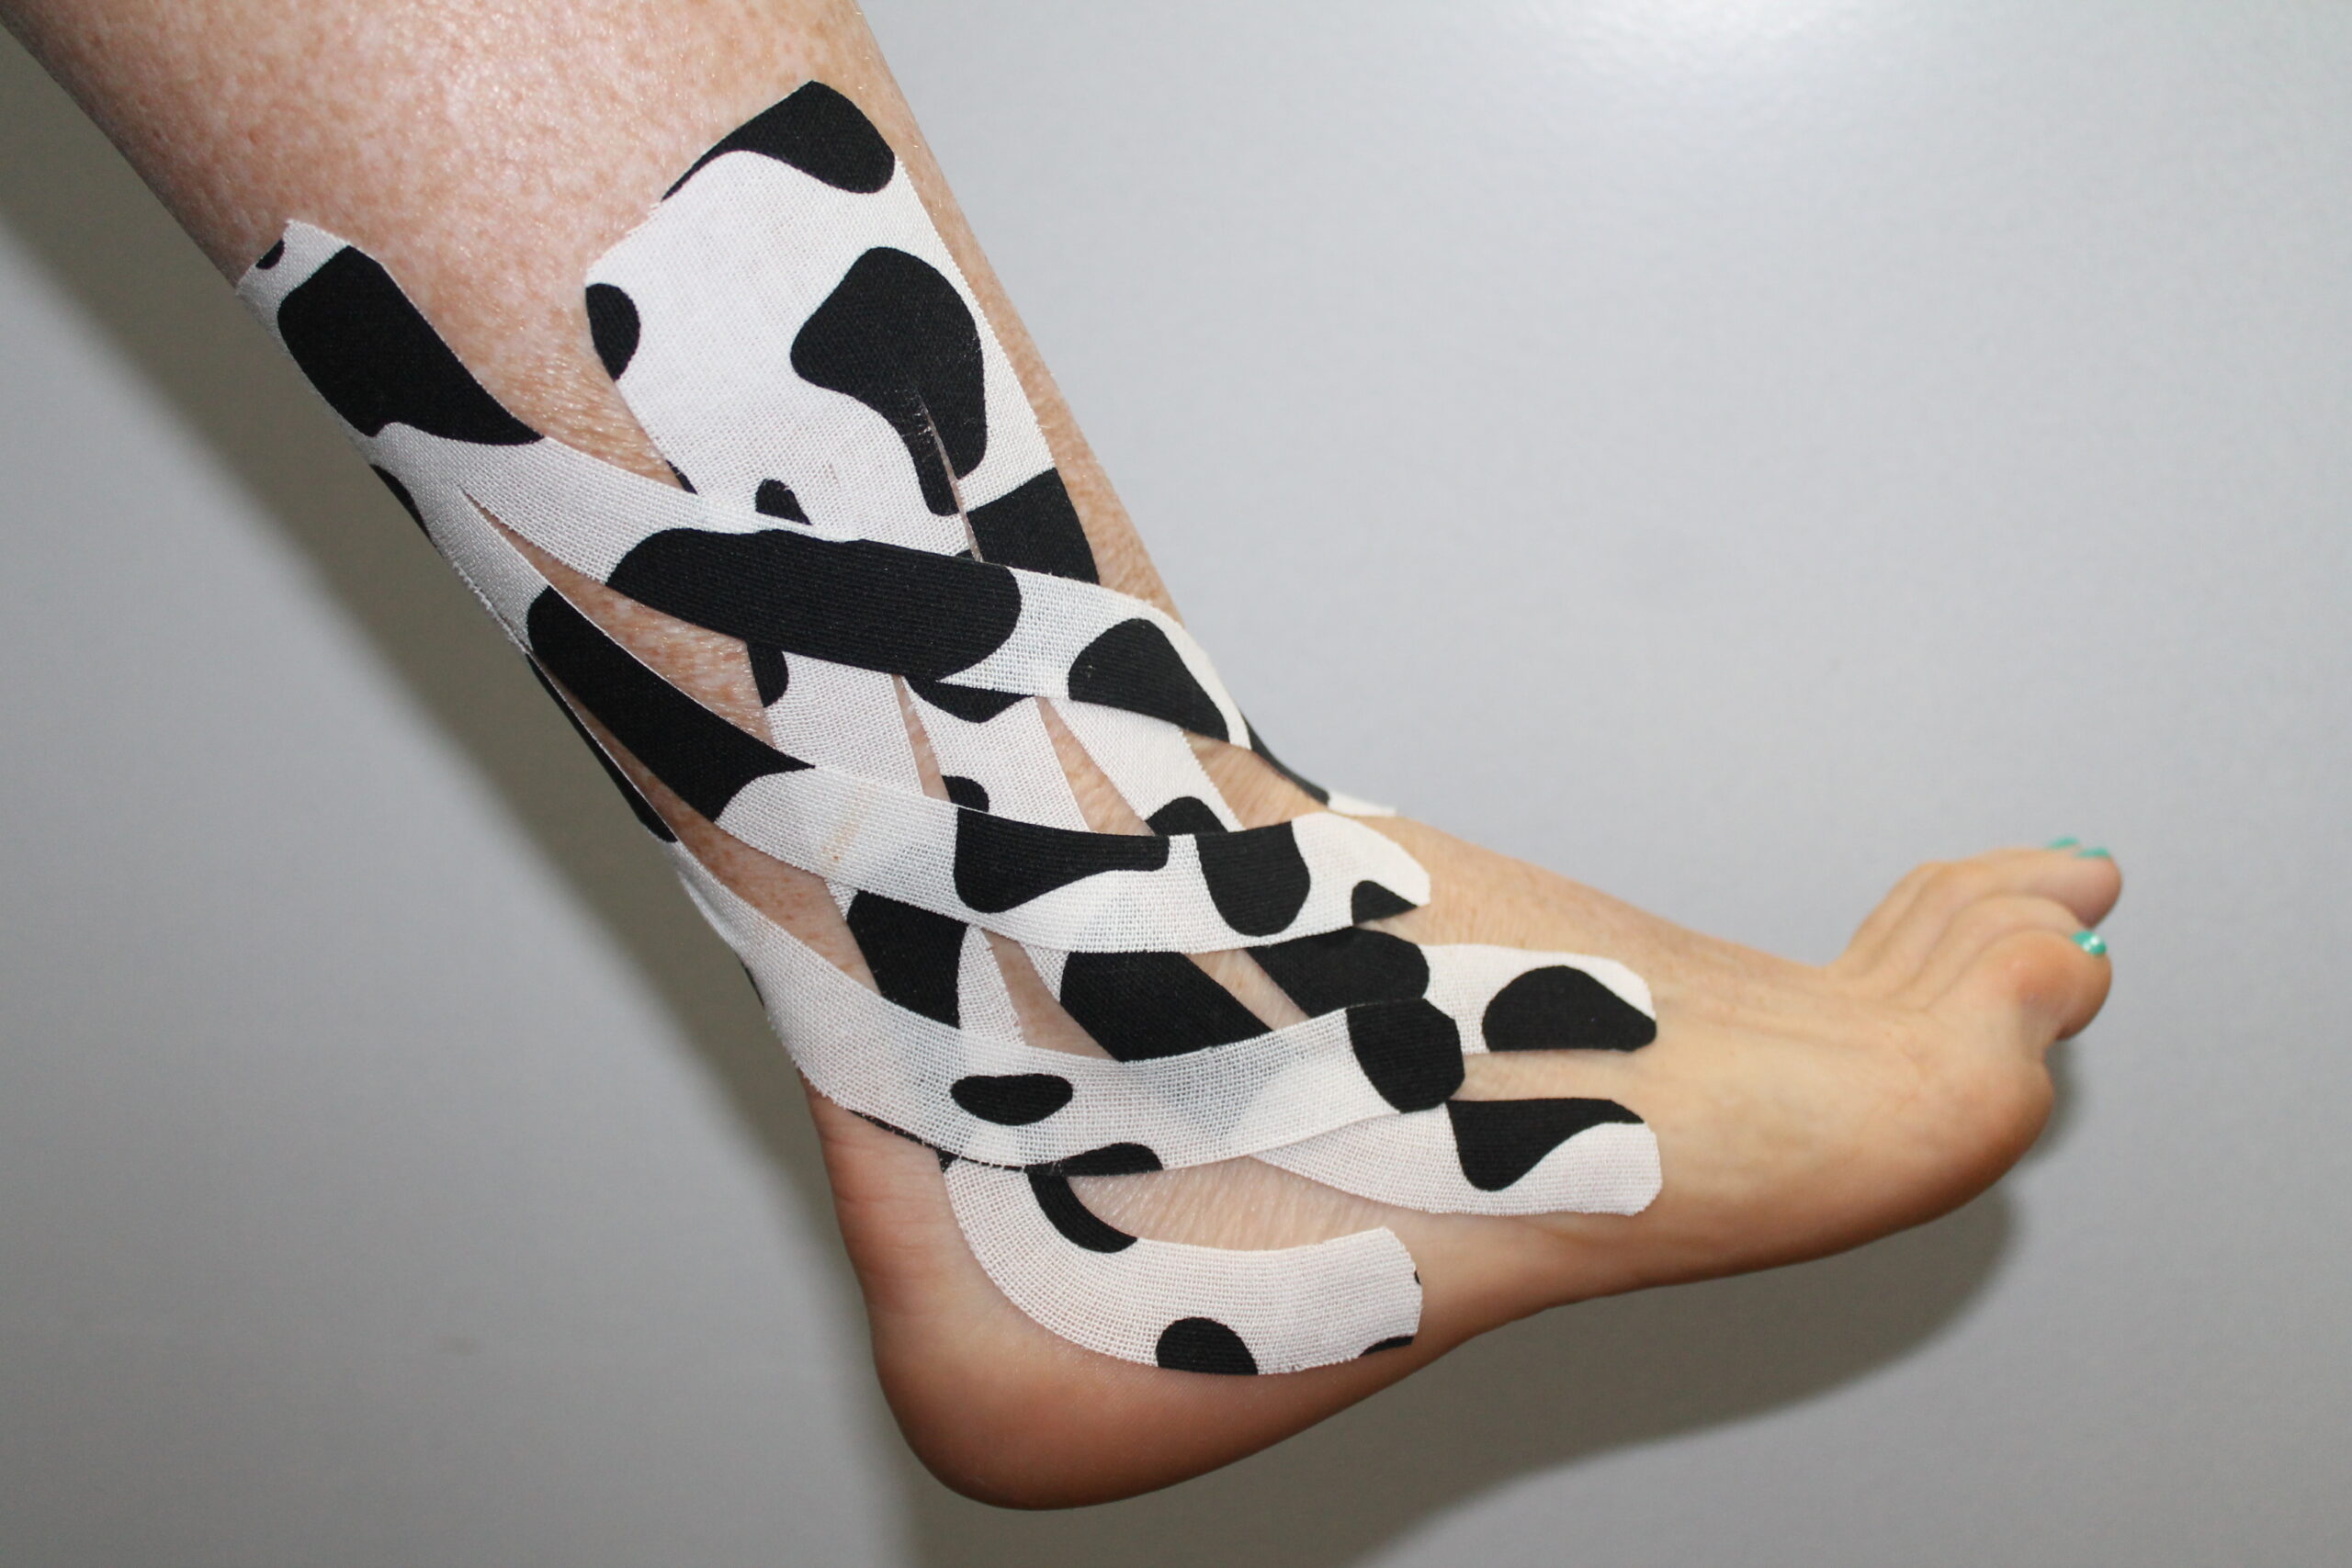 This image show a client with kinesiology tape on their ankle. the tape runs from their lower leg to the middle of their foot